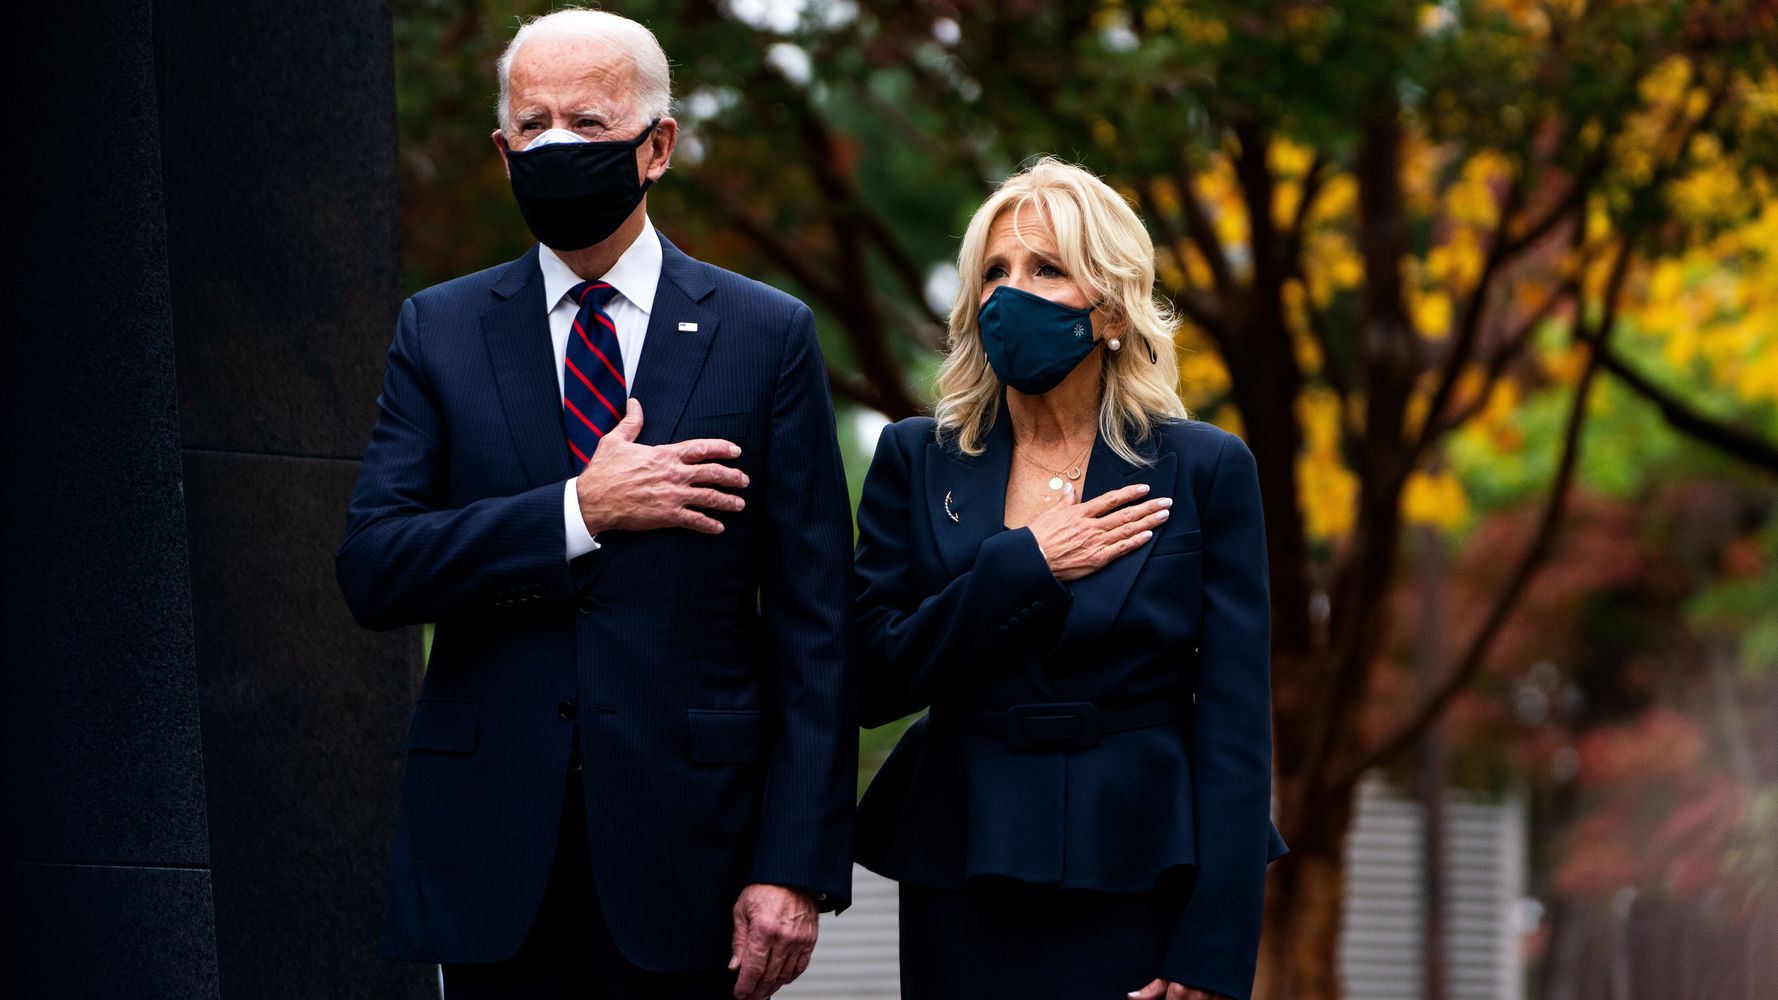 Joe And Jill Biden’s Thanksgiving Op-Ed: ‘We’re Going To Get Through This Together’